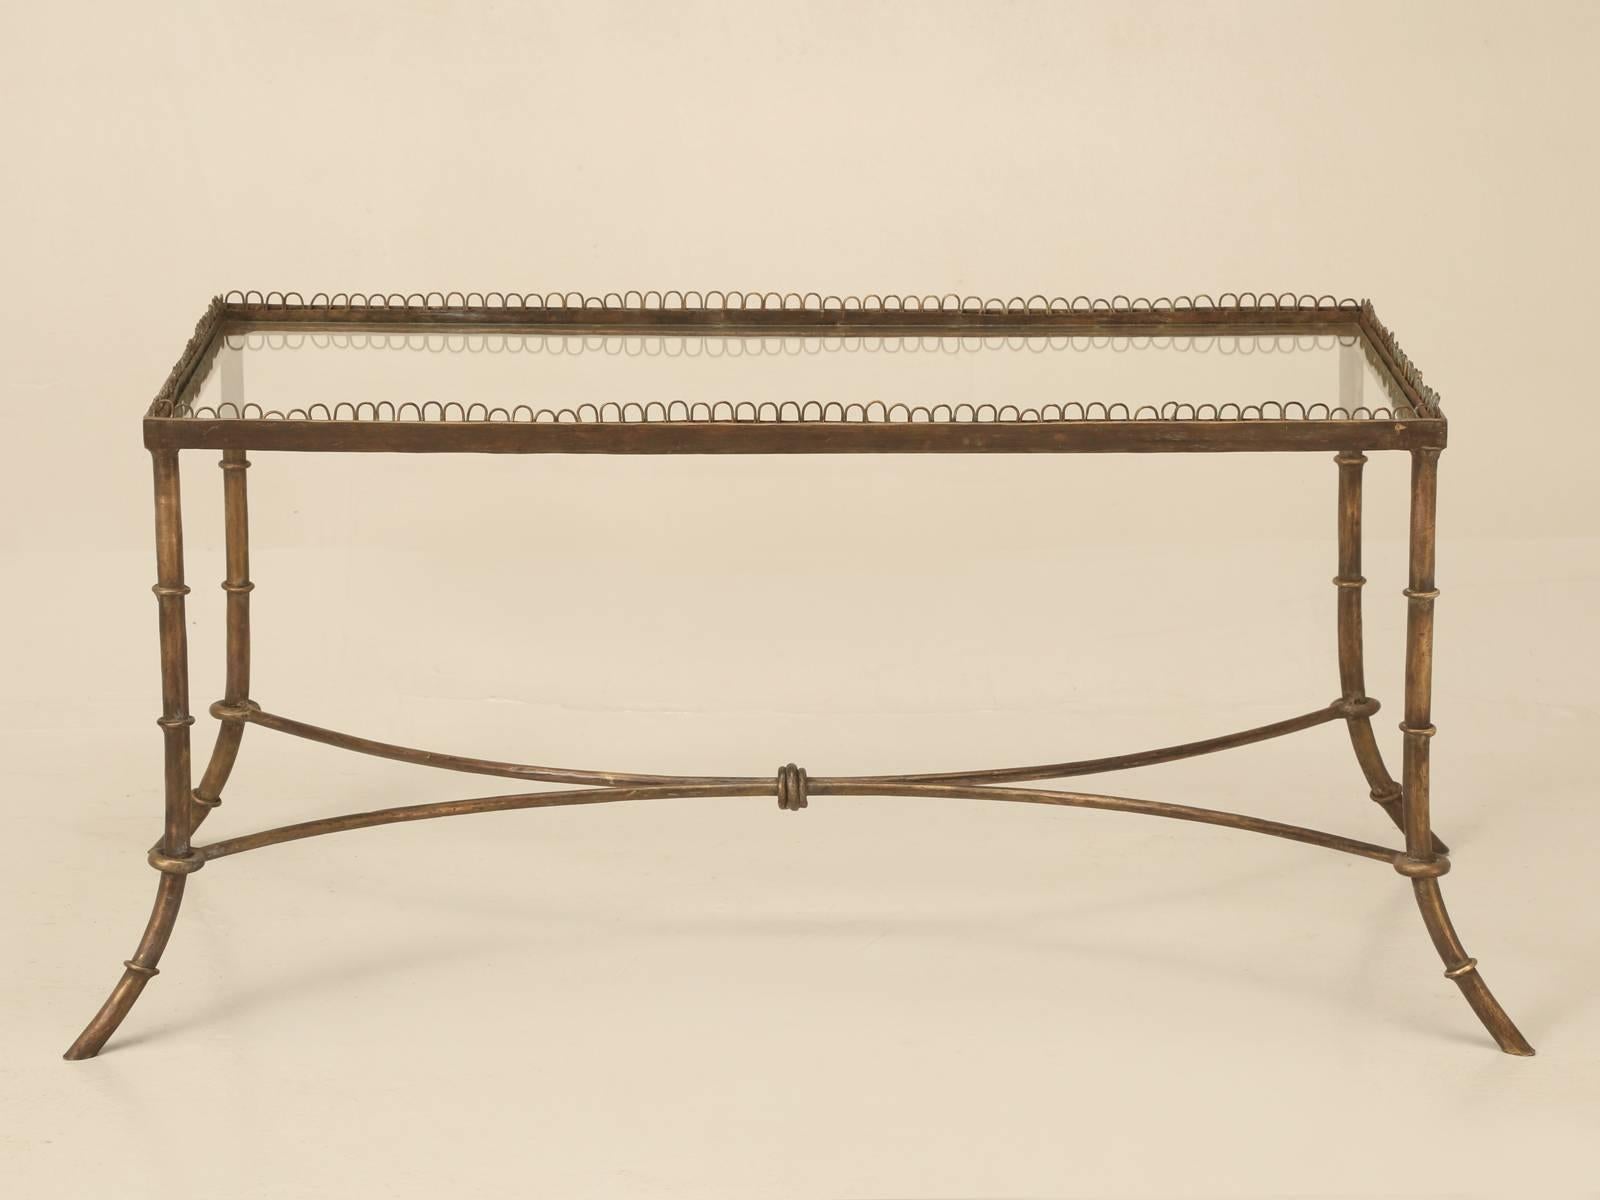 Vintage French brass coffee table (matching pair of end tables available on 1stdibs as well) in an unusual patina, that almost makes them look antique bronze on color. 

Measures: Height provided does not include the 5/8